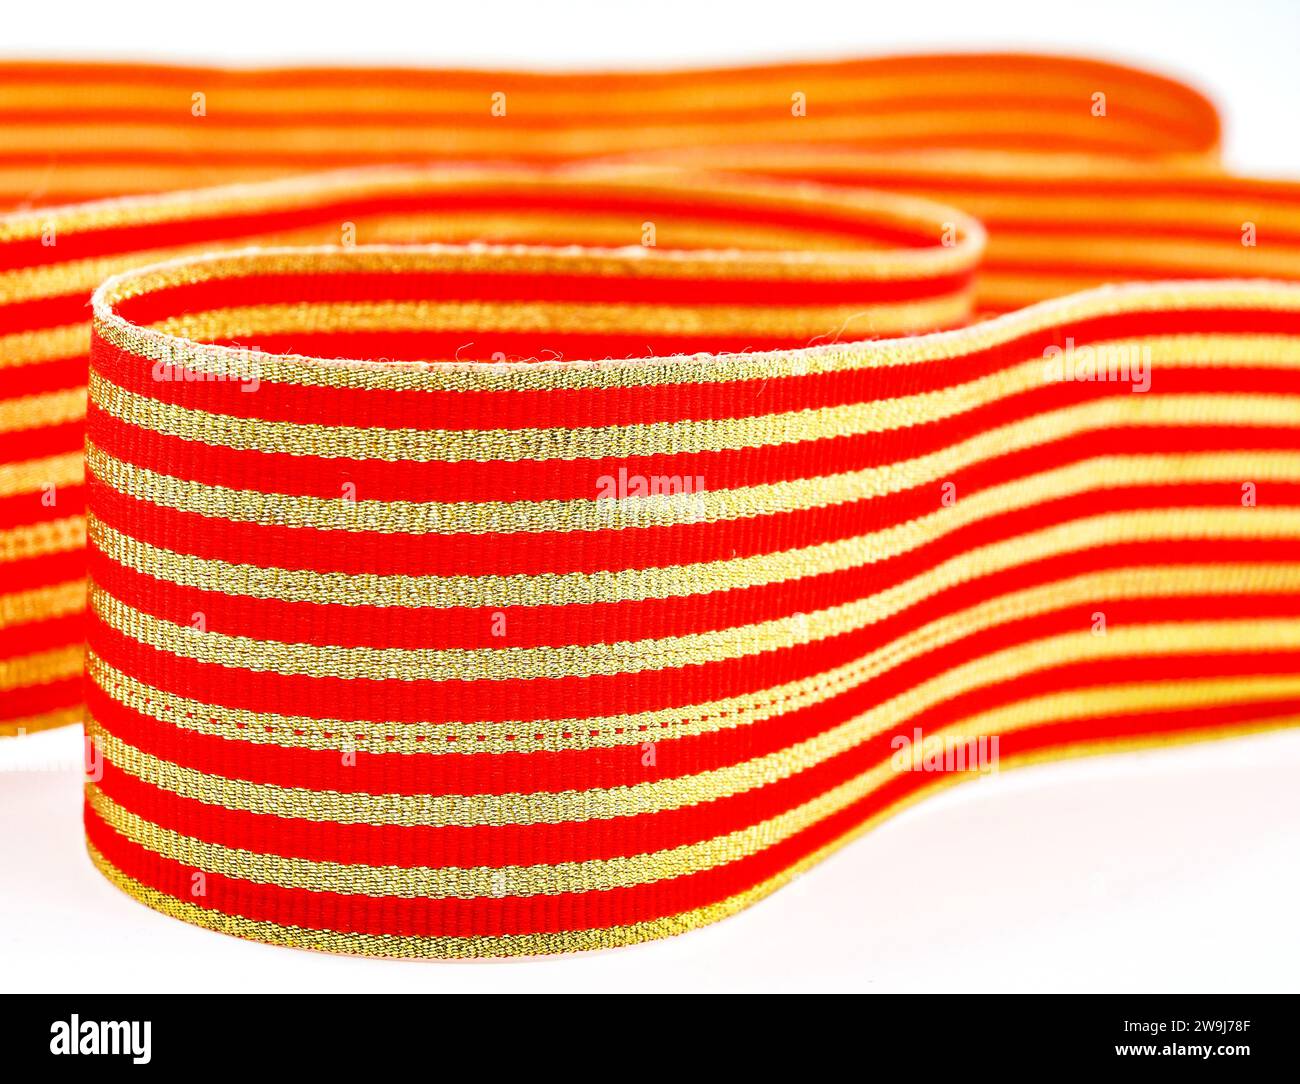 Close up view of red and gold coloured ribbon tape. Backgrounds. No people. Stock Photo